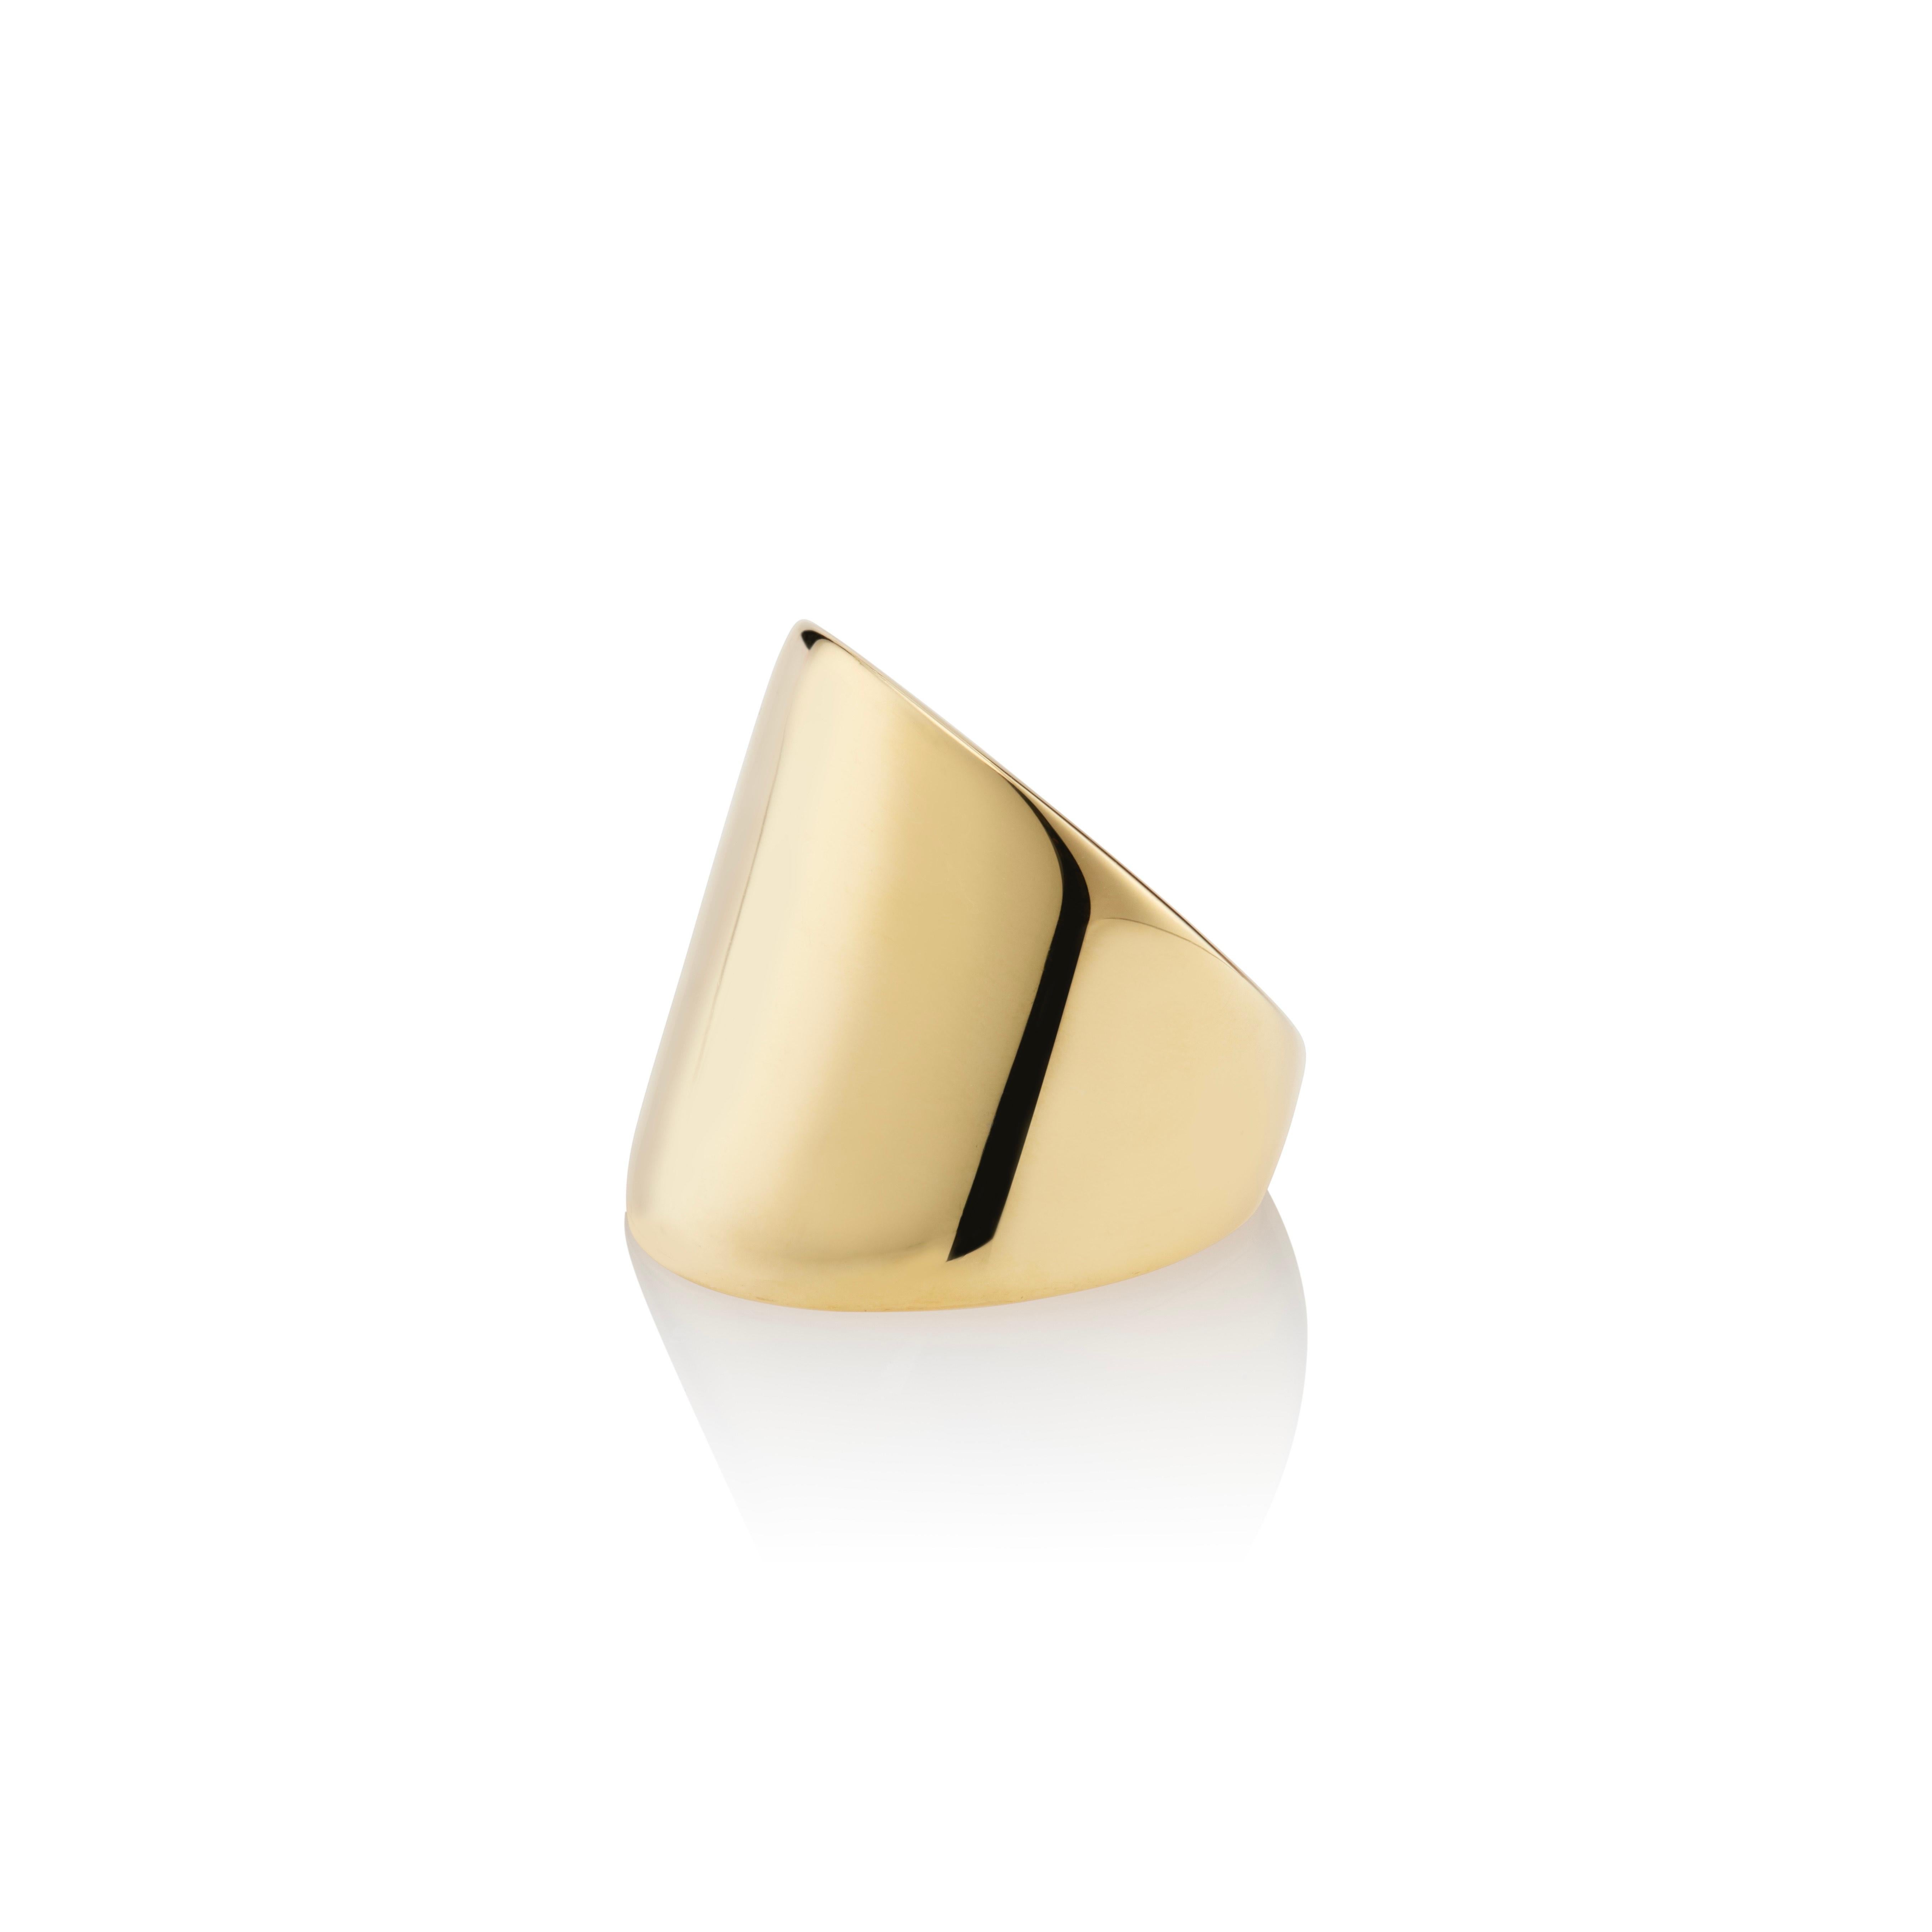 The design of the Wrapped Horn Ring is an homage to the horn as a symbol of protection and prosperity. 

Sophisticated and bold, this will quickly become the piece you reach for time and time again  

Size 7- Ring Size is customizable.

All items